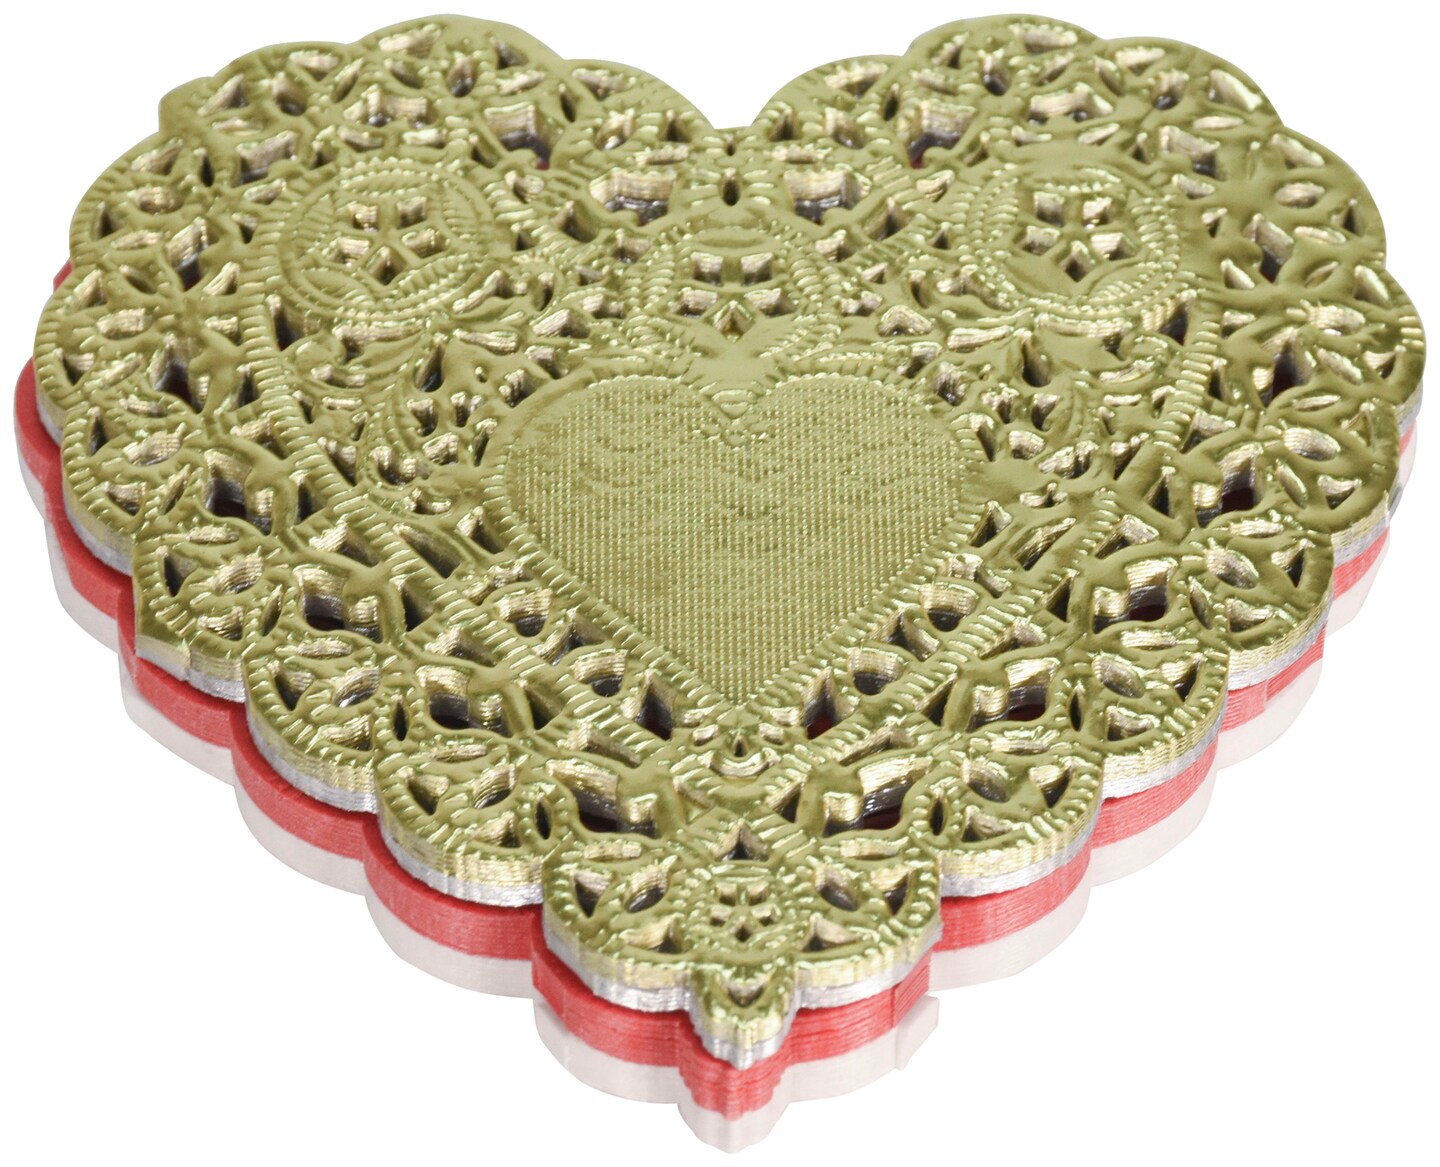 School Smart Paper Die-cut Heart Lace Doily, 4 Inches, Red, Pack